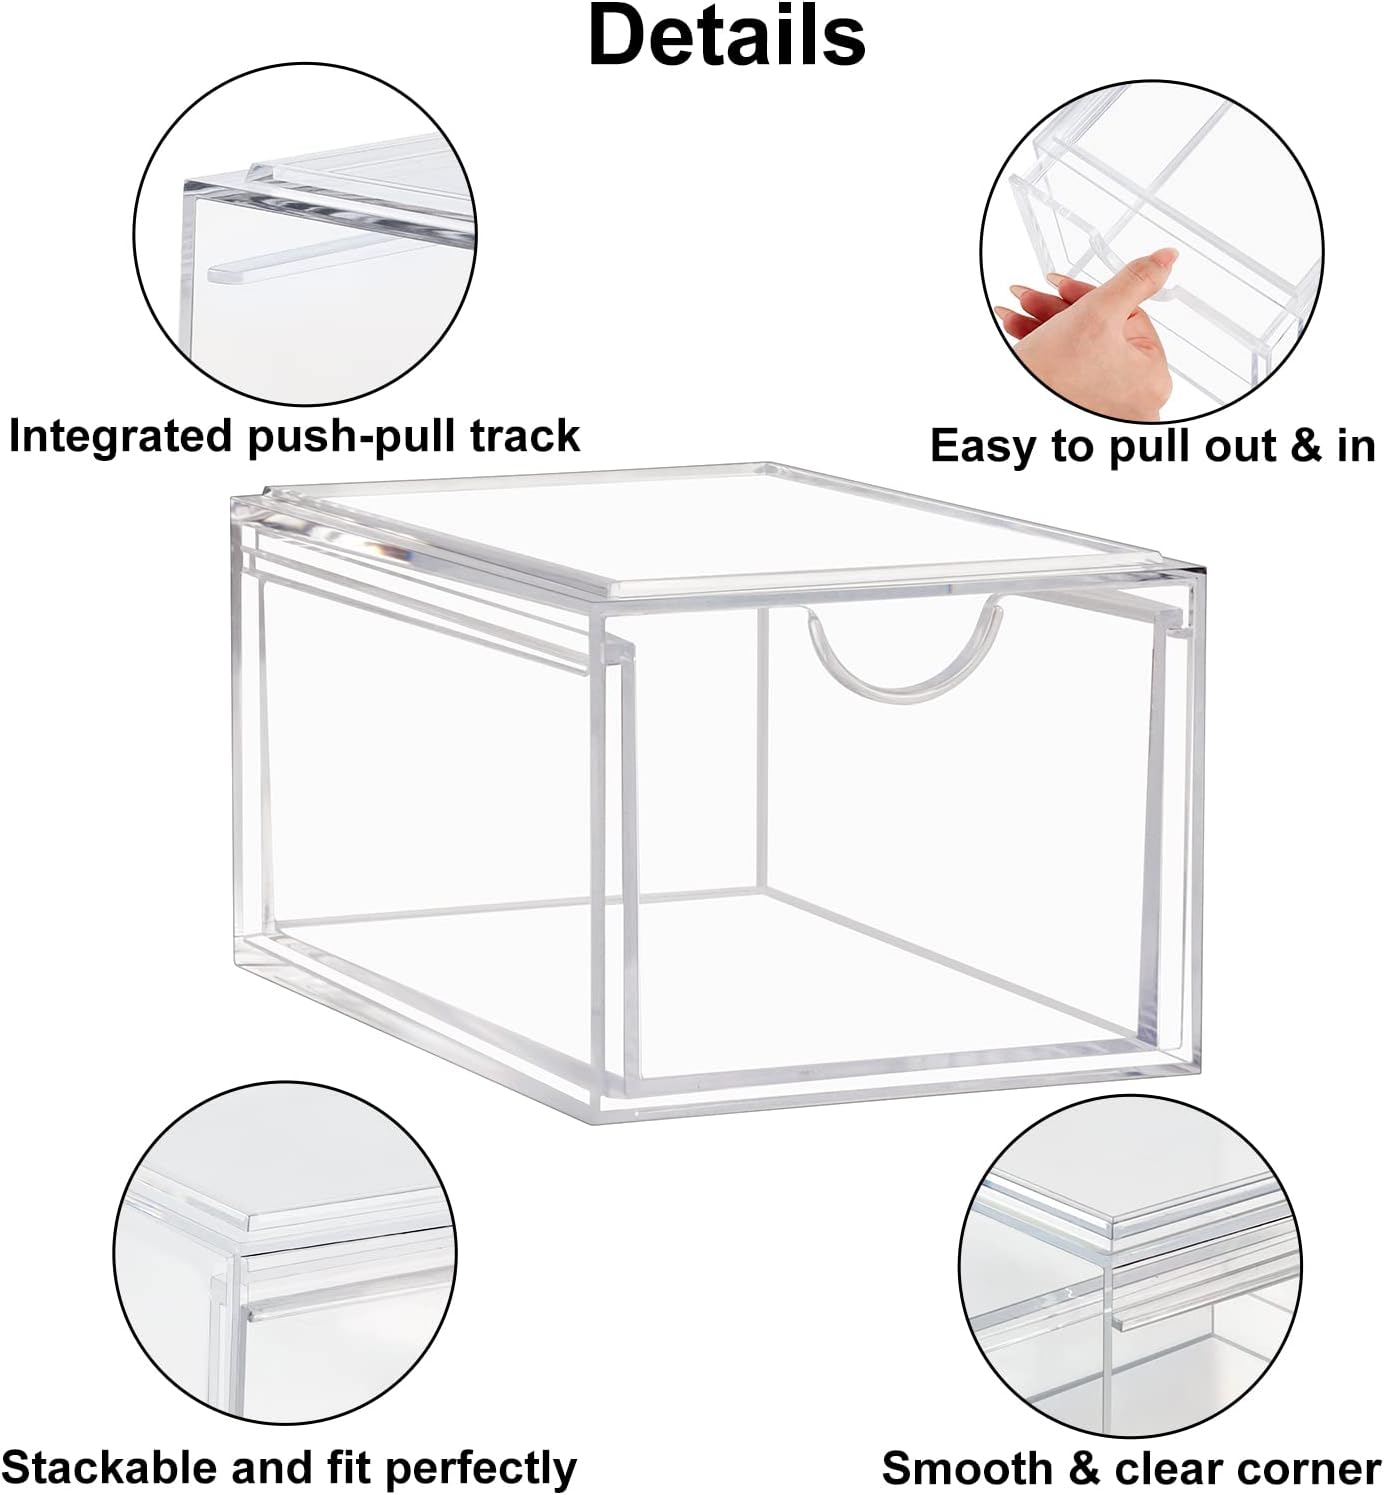 2 Pack Acrylic Stackable Storage Drawers Makeup Organizer, 20% Thicker Clear Bathroom Organizers for Cosmetics, Skin Care, Hair Accessories, Beauty, Vanity, Countertop and Dresser